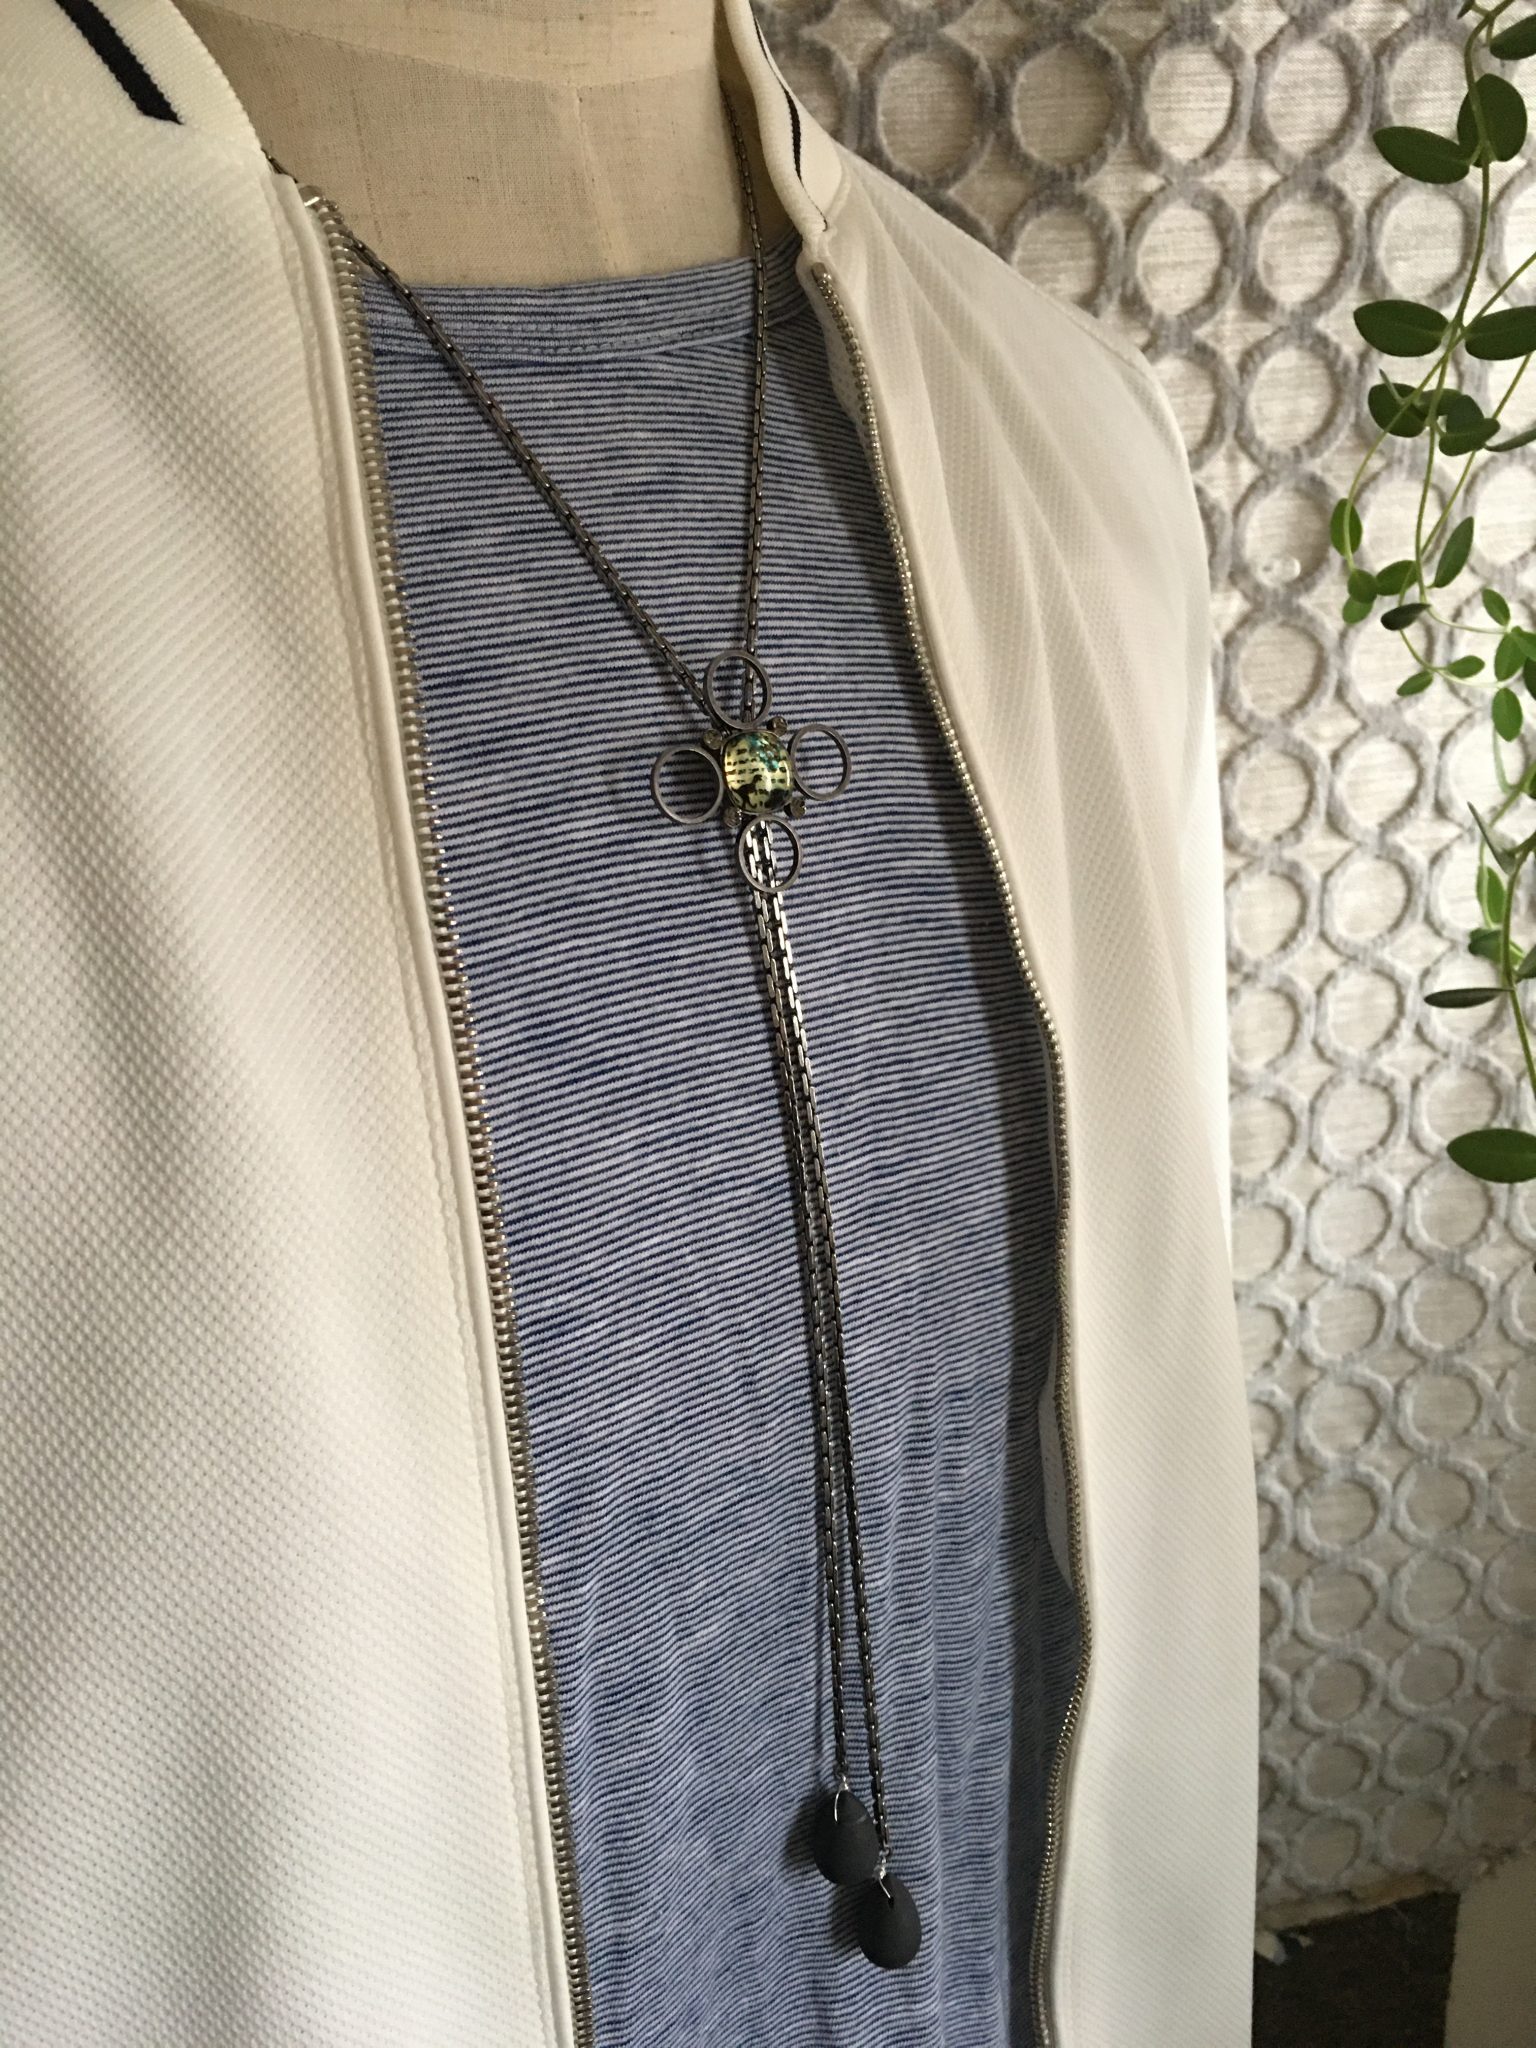 necklace
